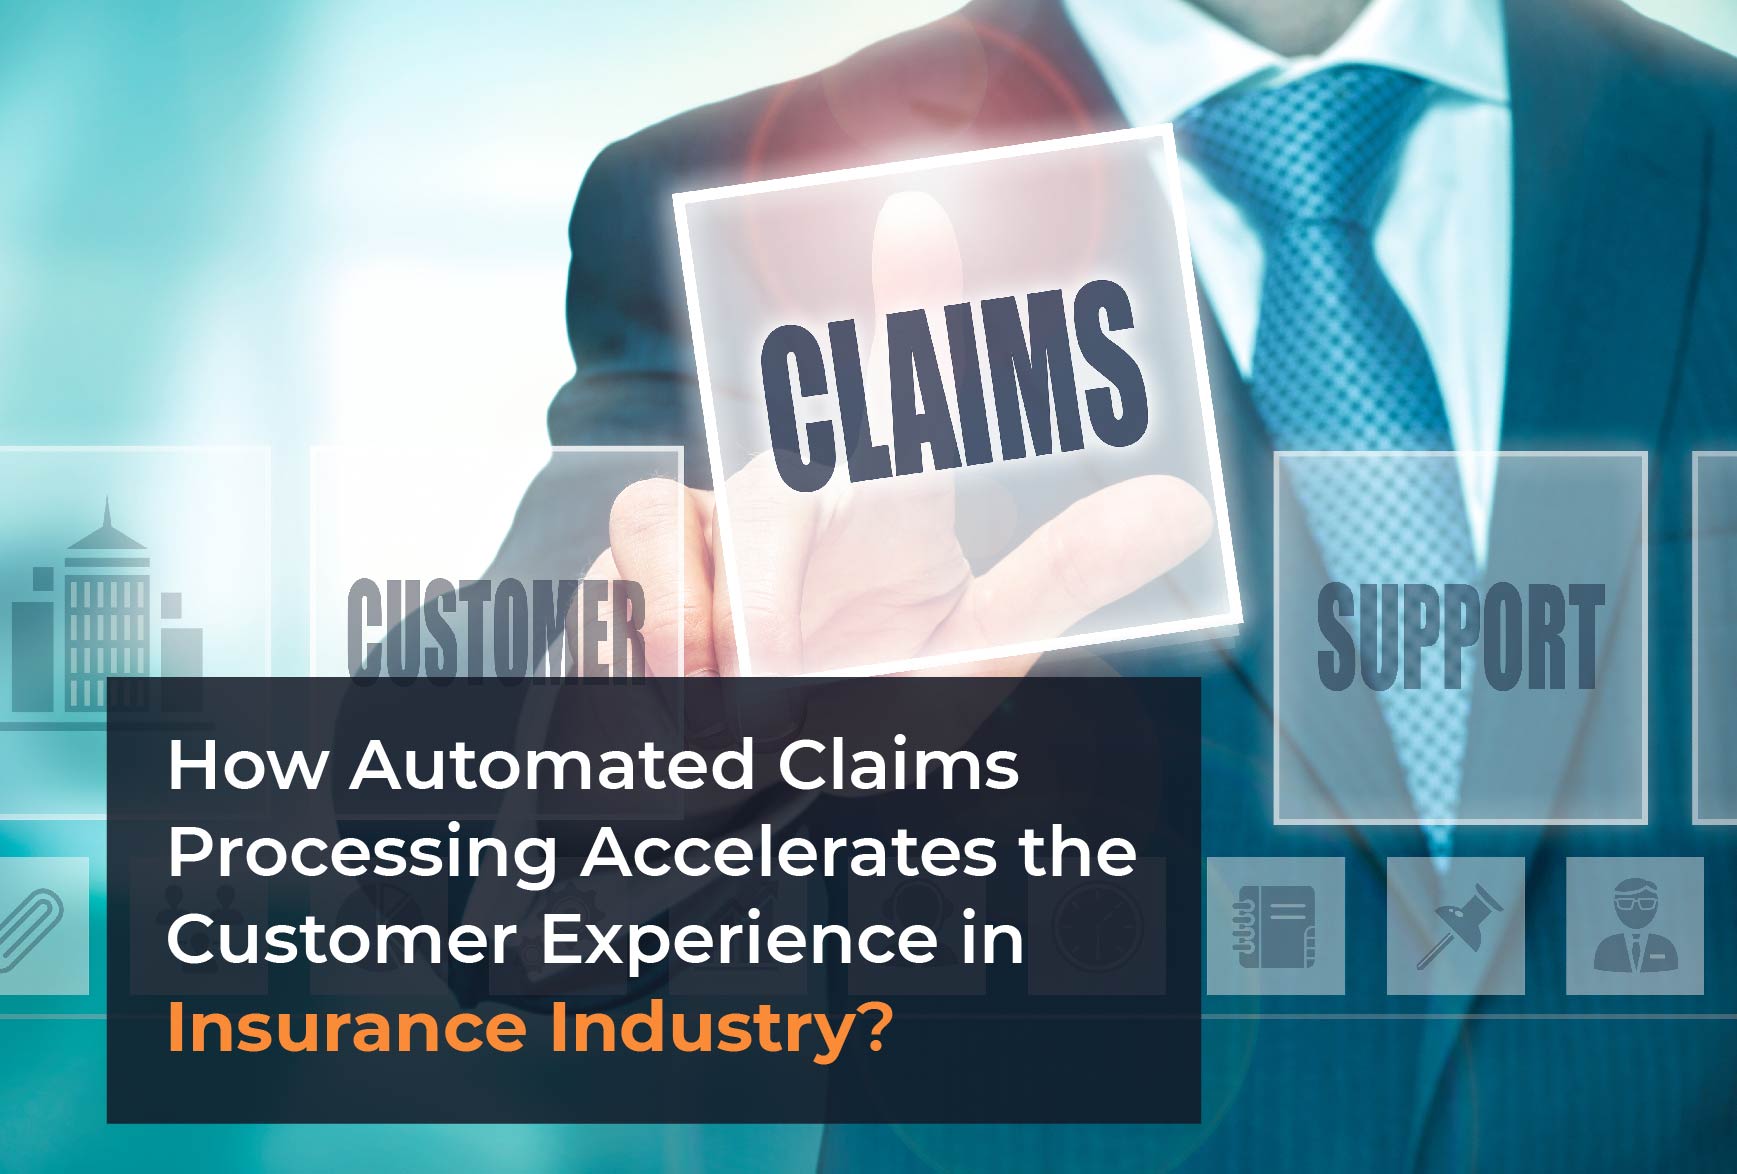 How Automated Claims Processing Accelerates the Customer Experience in Insurance Industry?